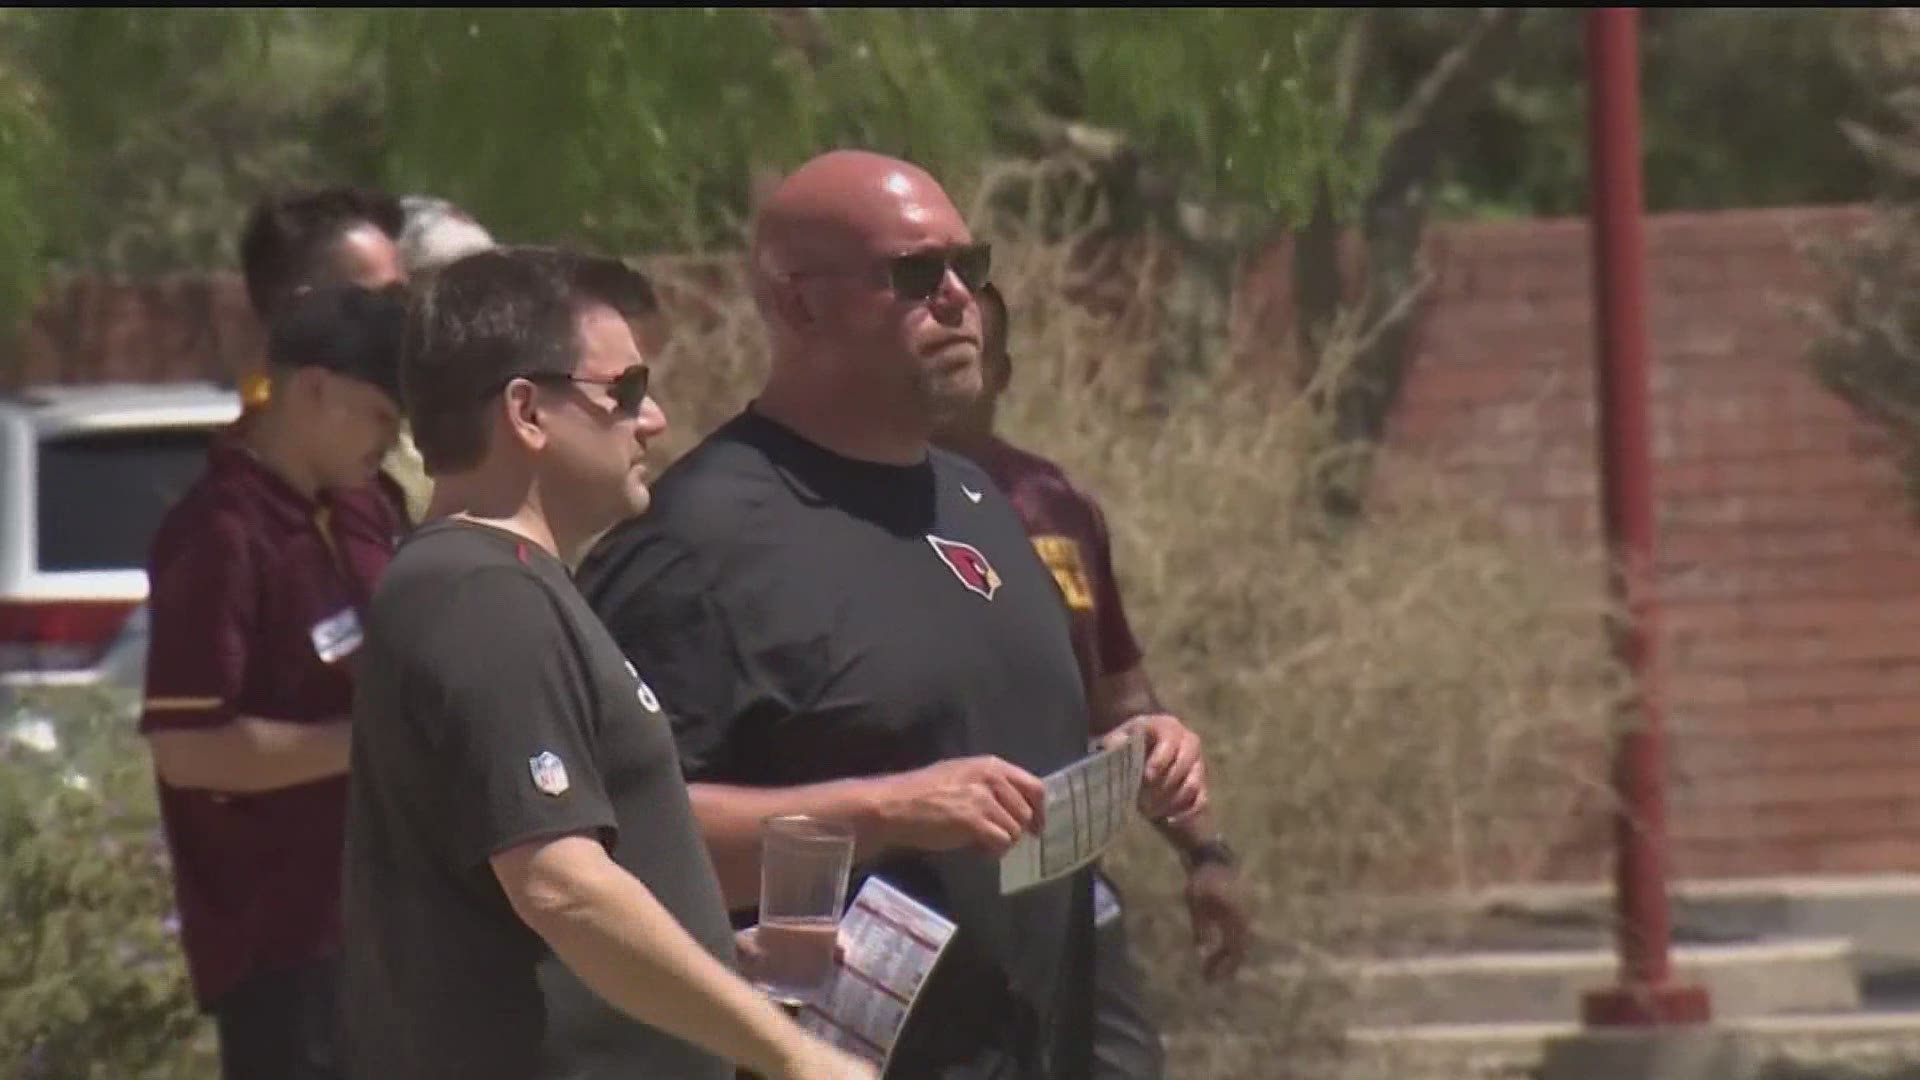 Arizona Cardinals General Manager Steve Keim is ready for his 21st NFL Draft, but the Red Land grad says this one will be unlike any he's been a part of before.